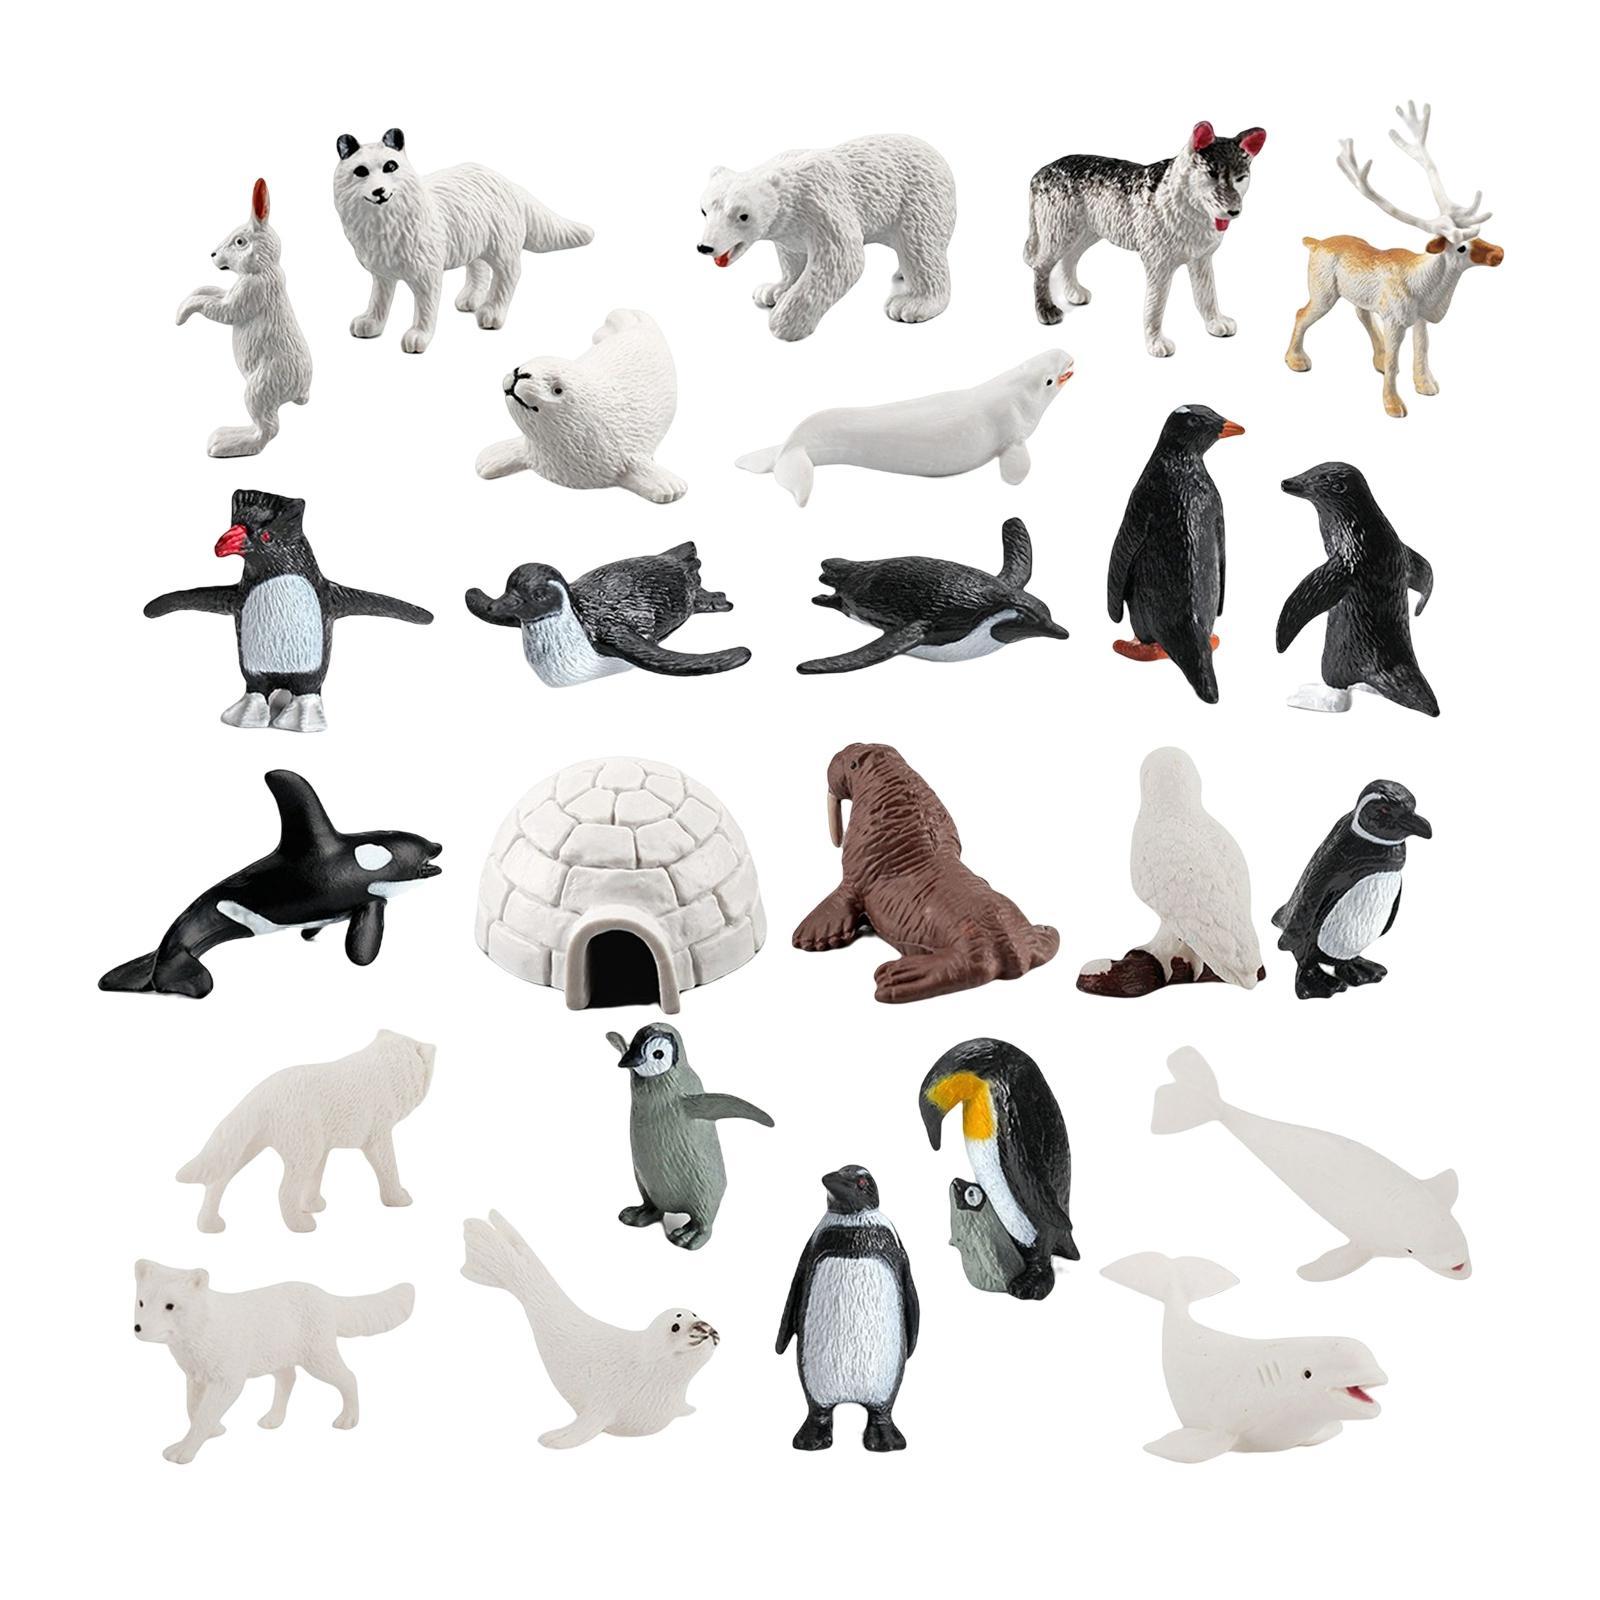 26Pcs  Animal Figurines Small Statues Figures Set Toys for Home Decor